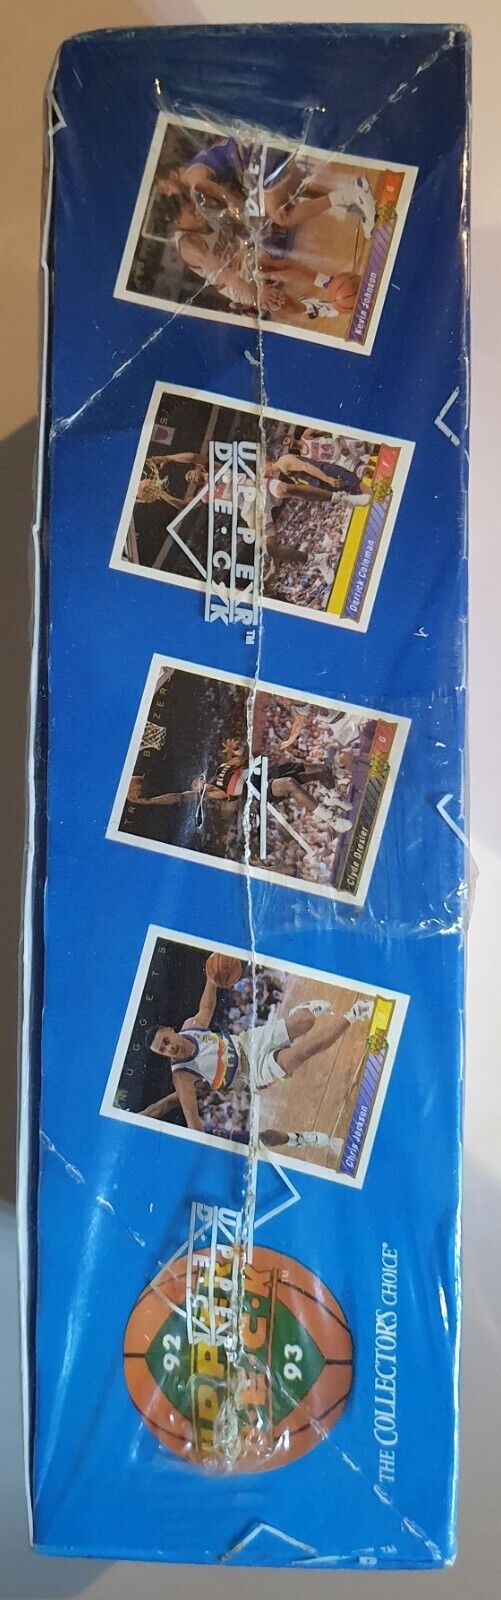 1992-93 Upper Deck NBA Basketball Cards Low Series - Factory Sealed Box